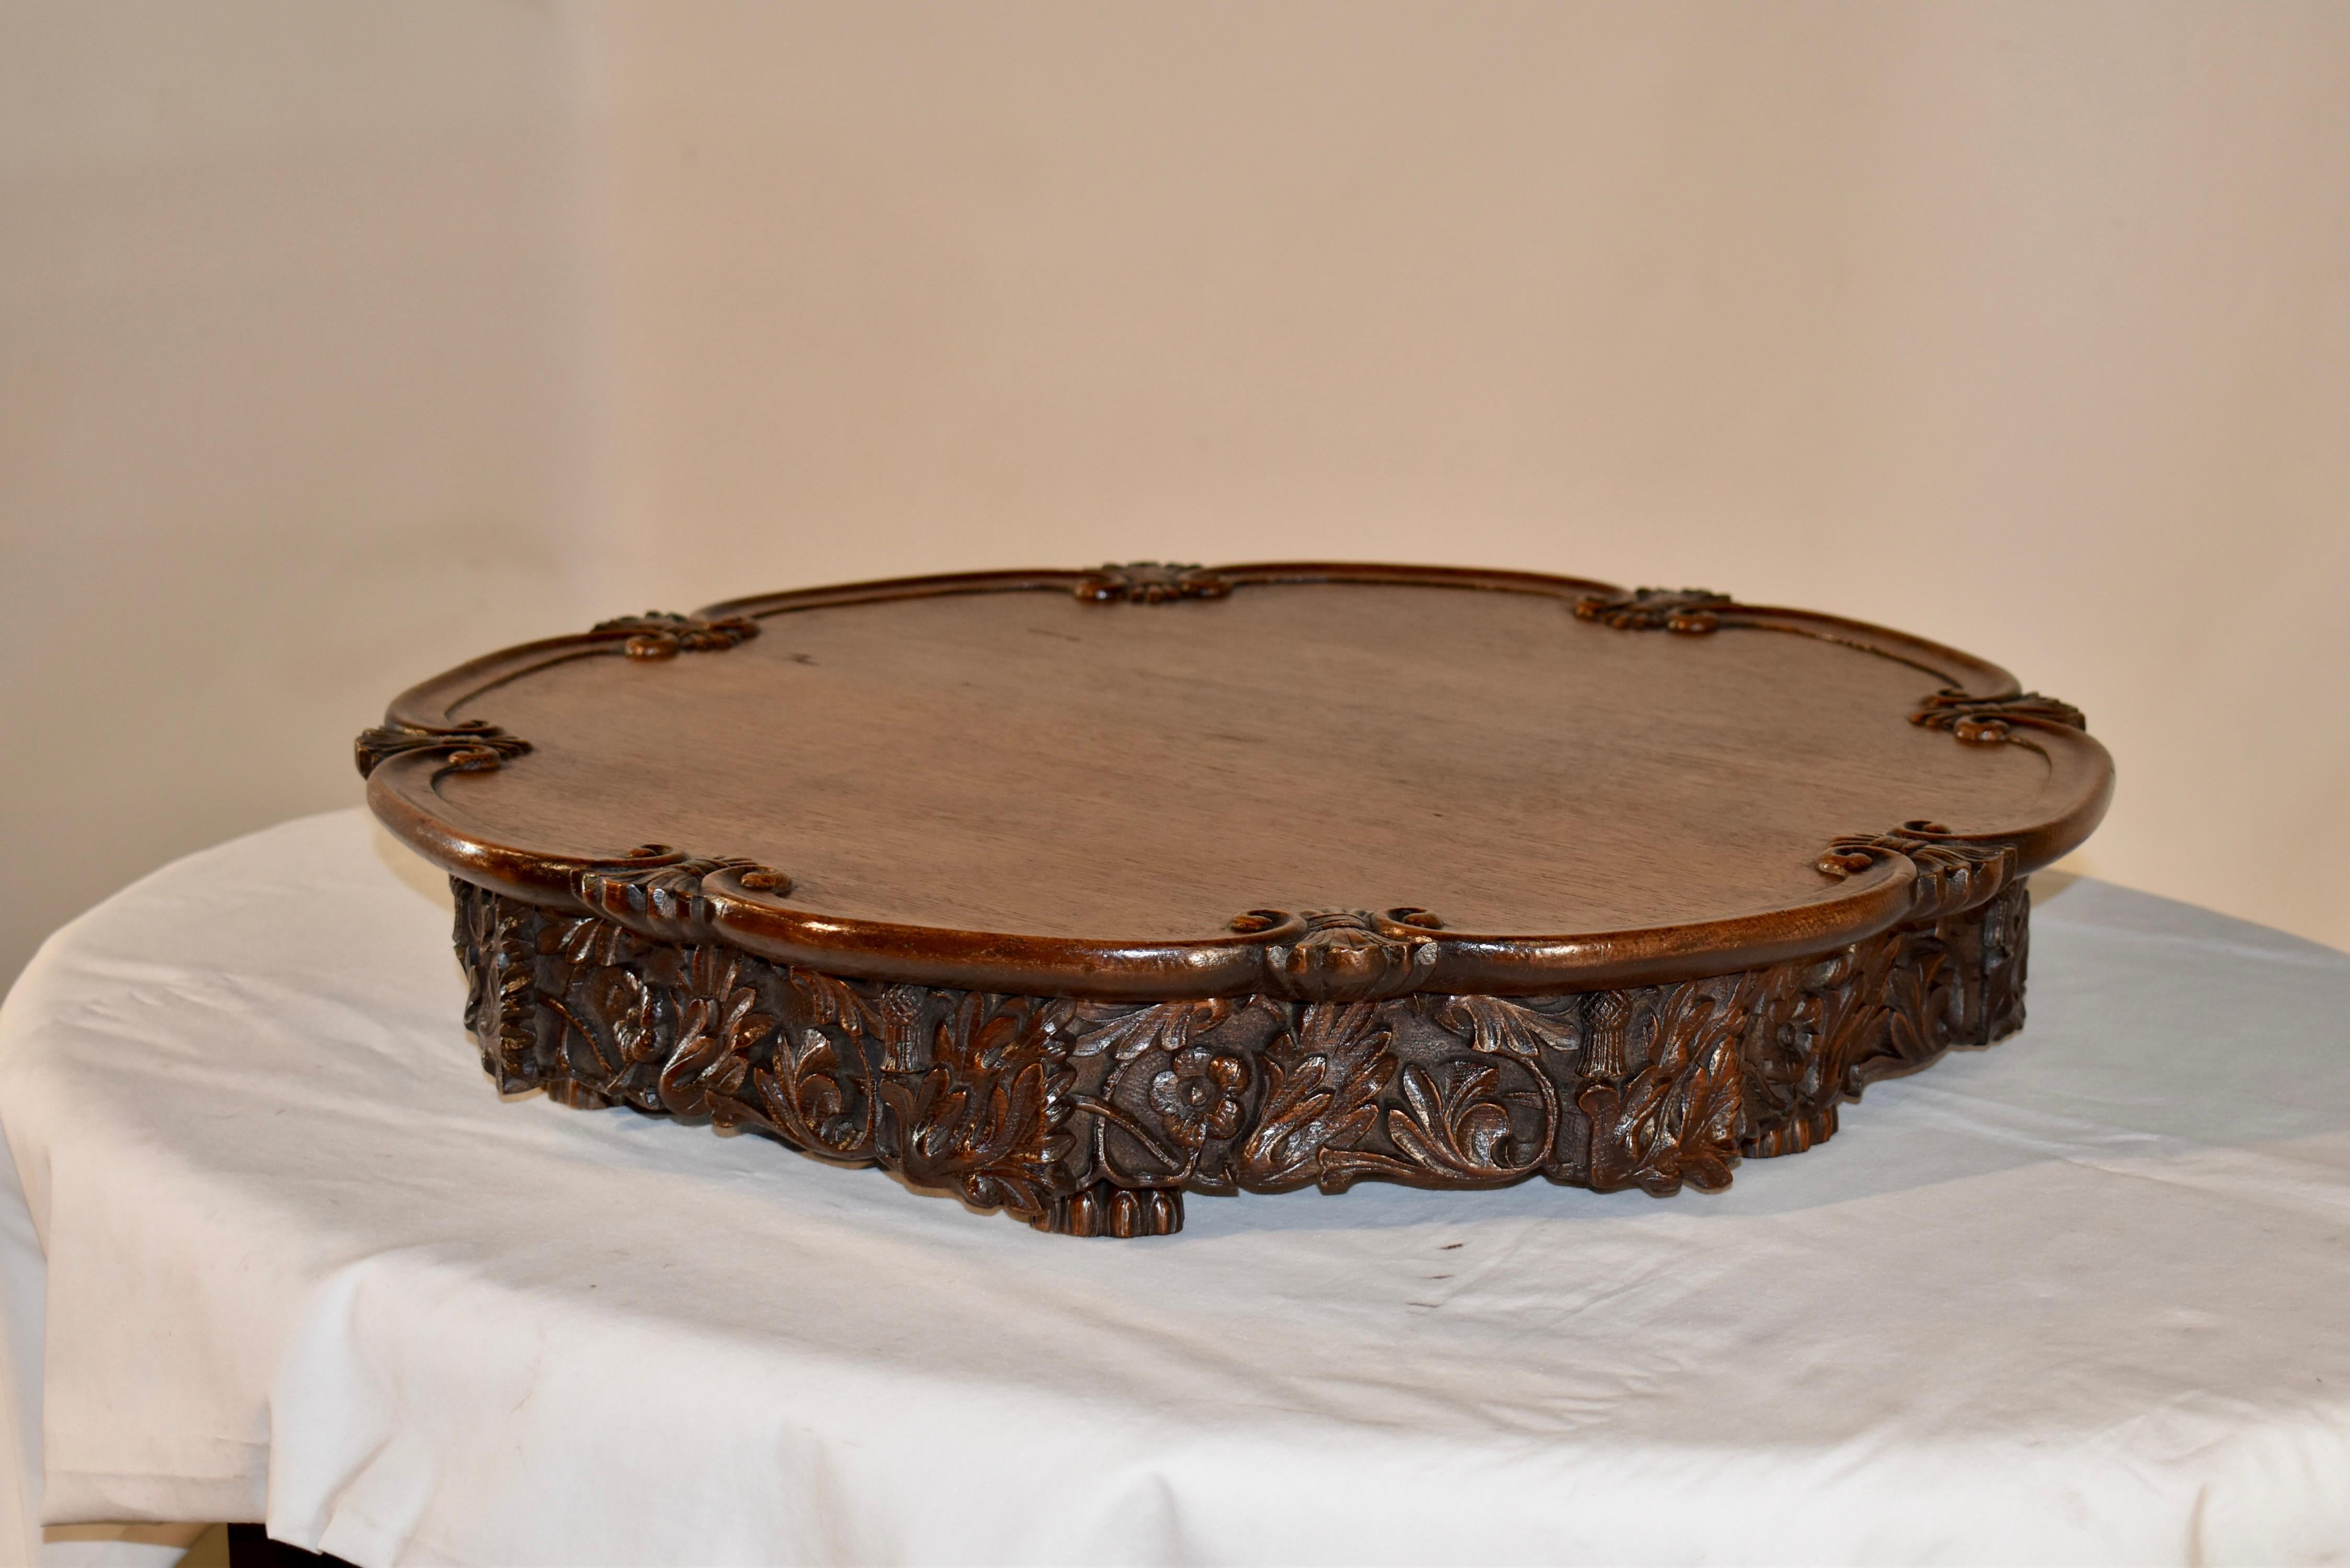 Early 19th century period Georgian lazy Susan made from oak. This entire piece is absolutely magnificent! The top is made from one solid board with exquisite hand carving. The edges are molded and scalloped and intersect with a fleur-de-lis type